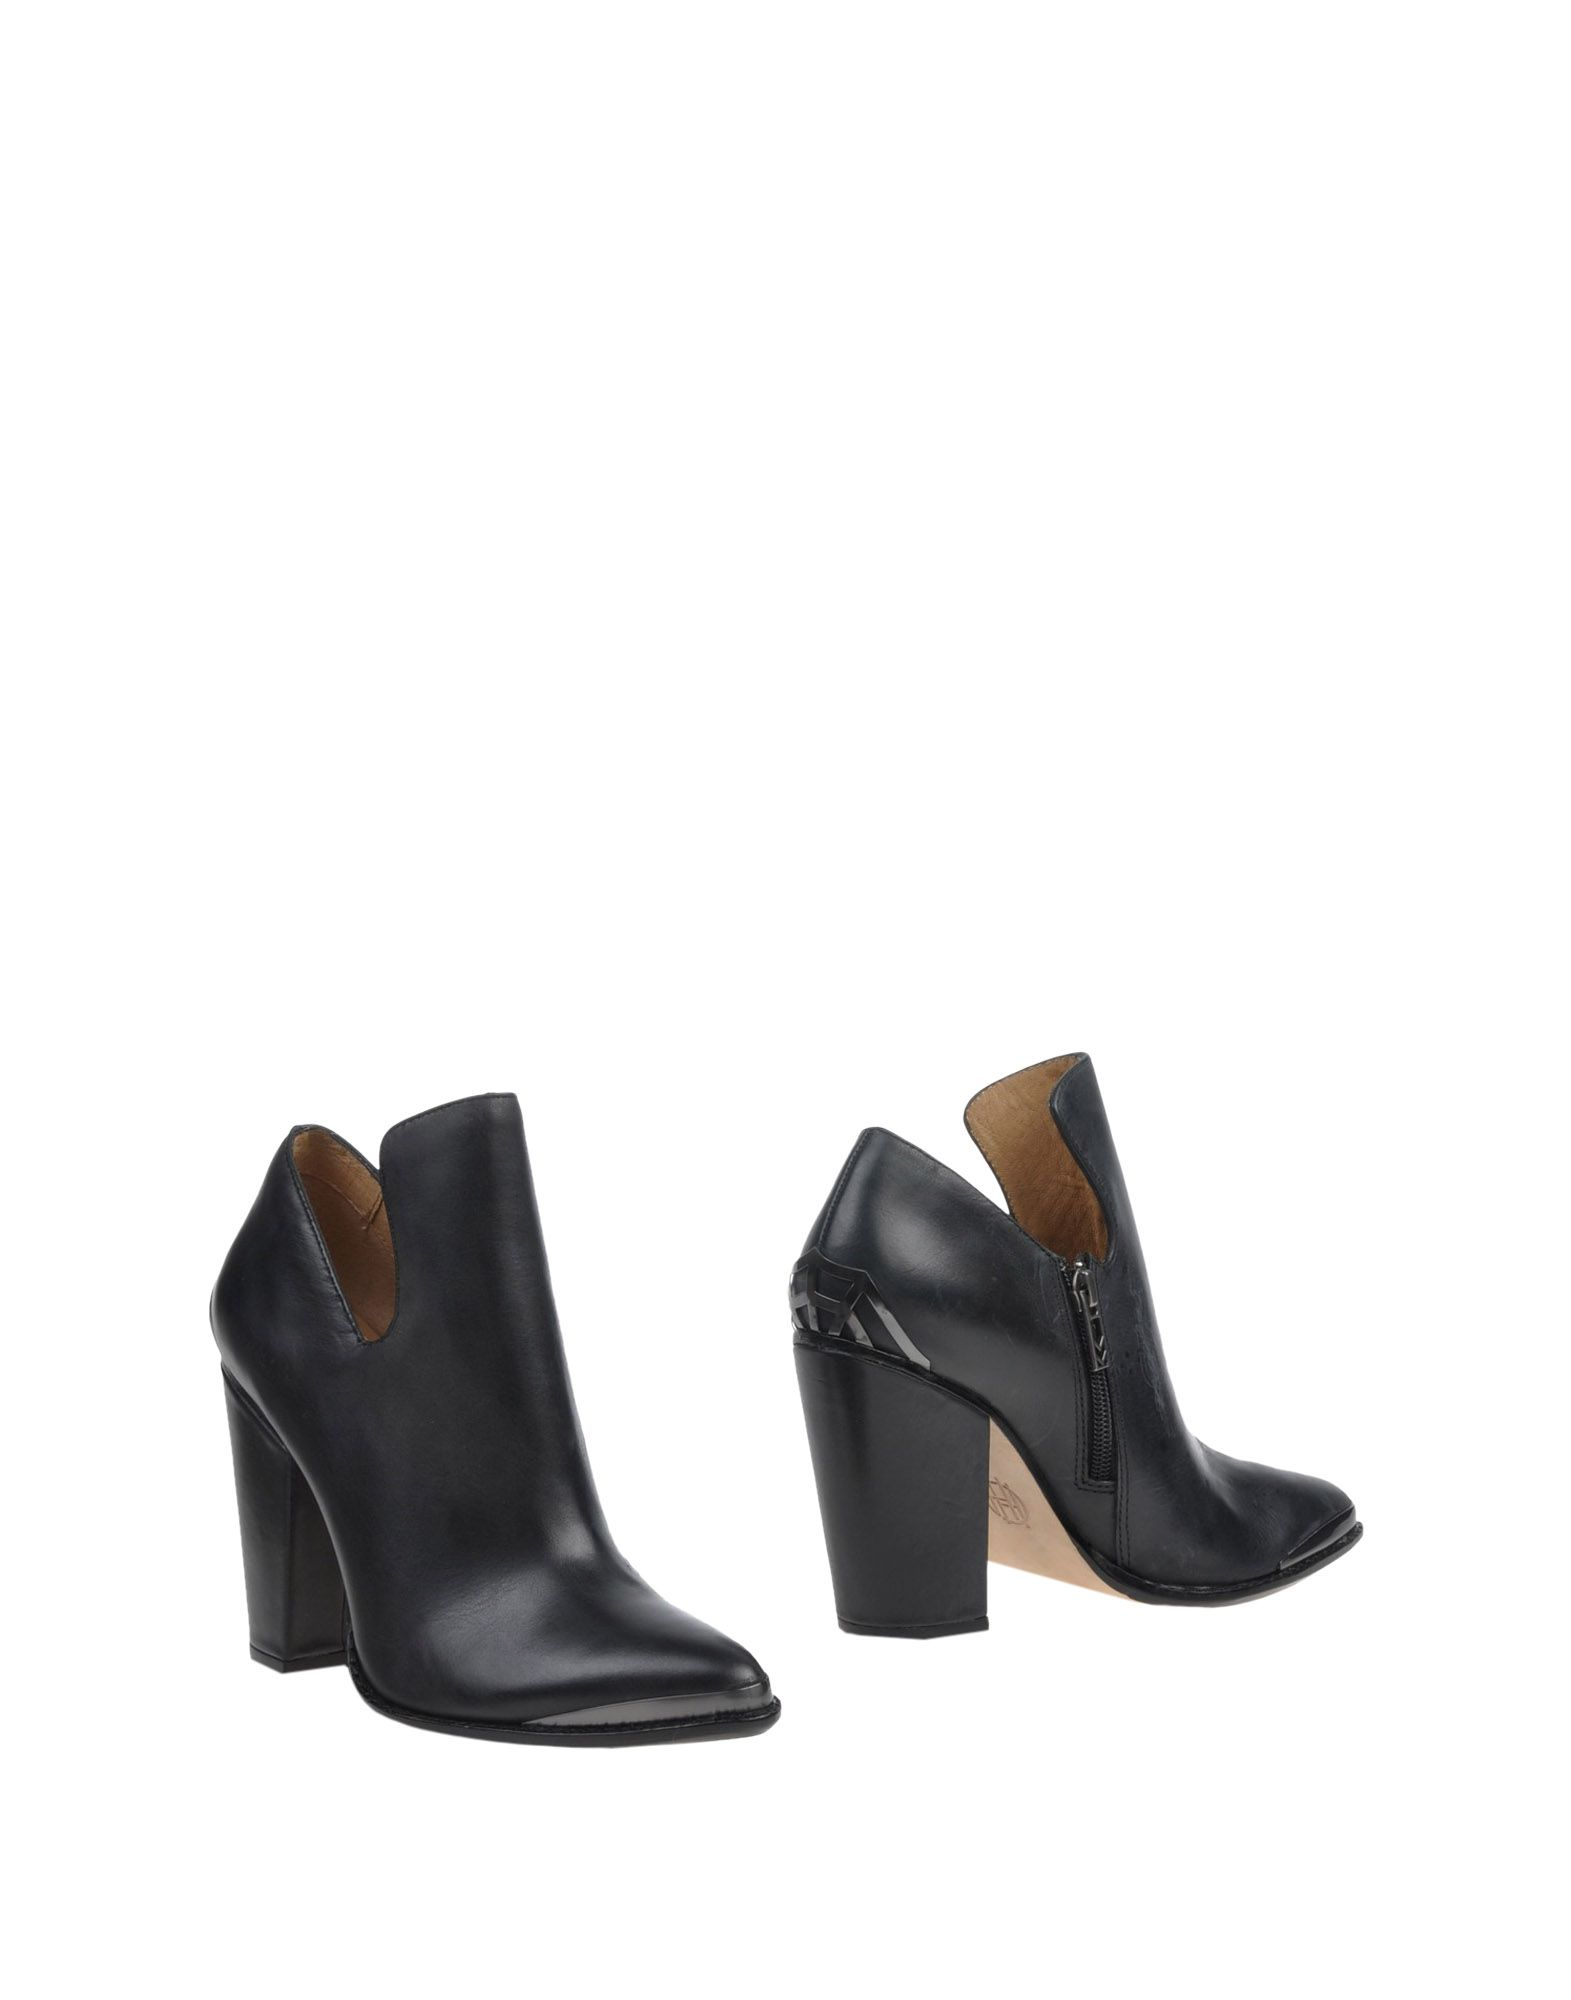 Lyst - House Of Harlow 1960 Shoe Boots in Black